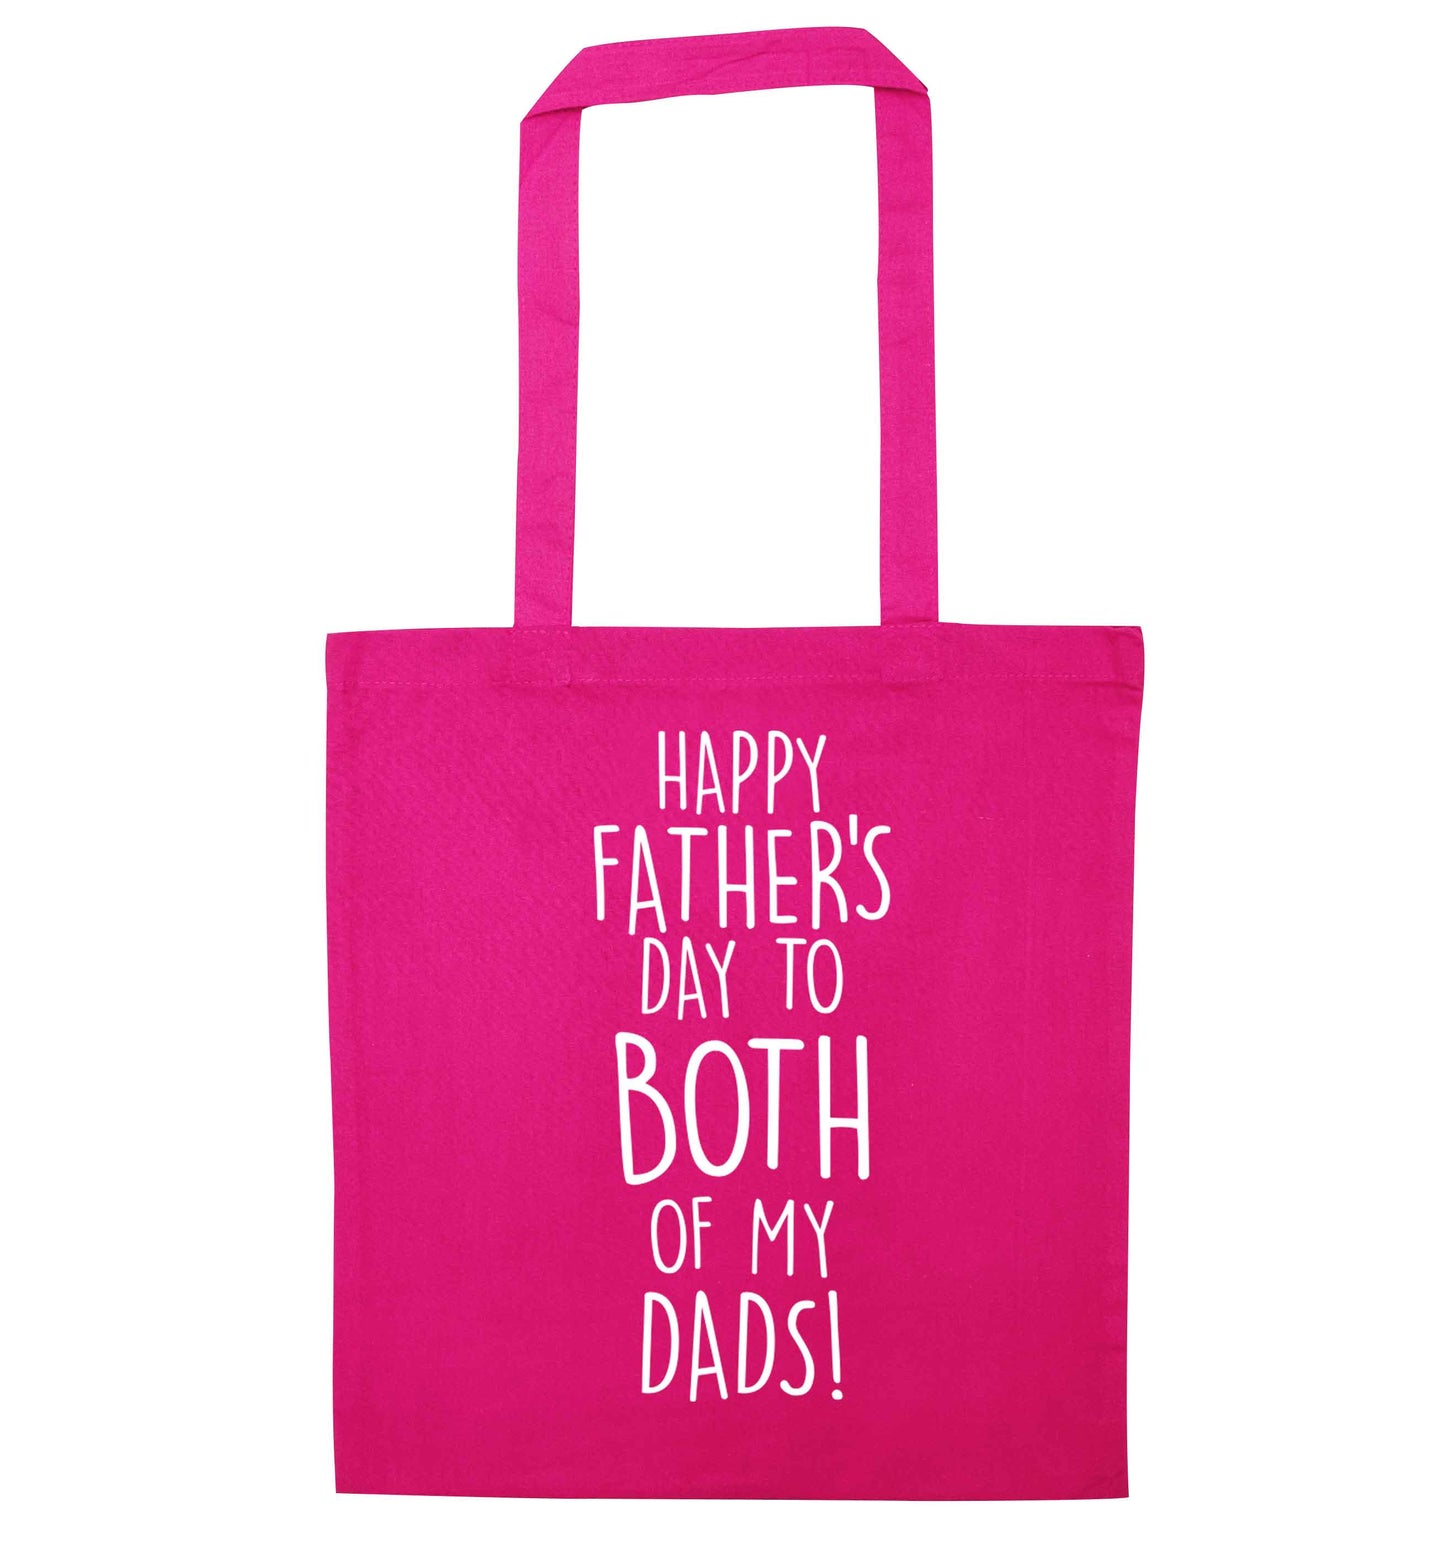 Happy Father's day to both of my dads pink tote bag